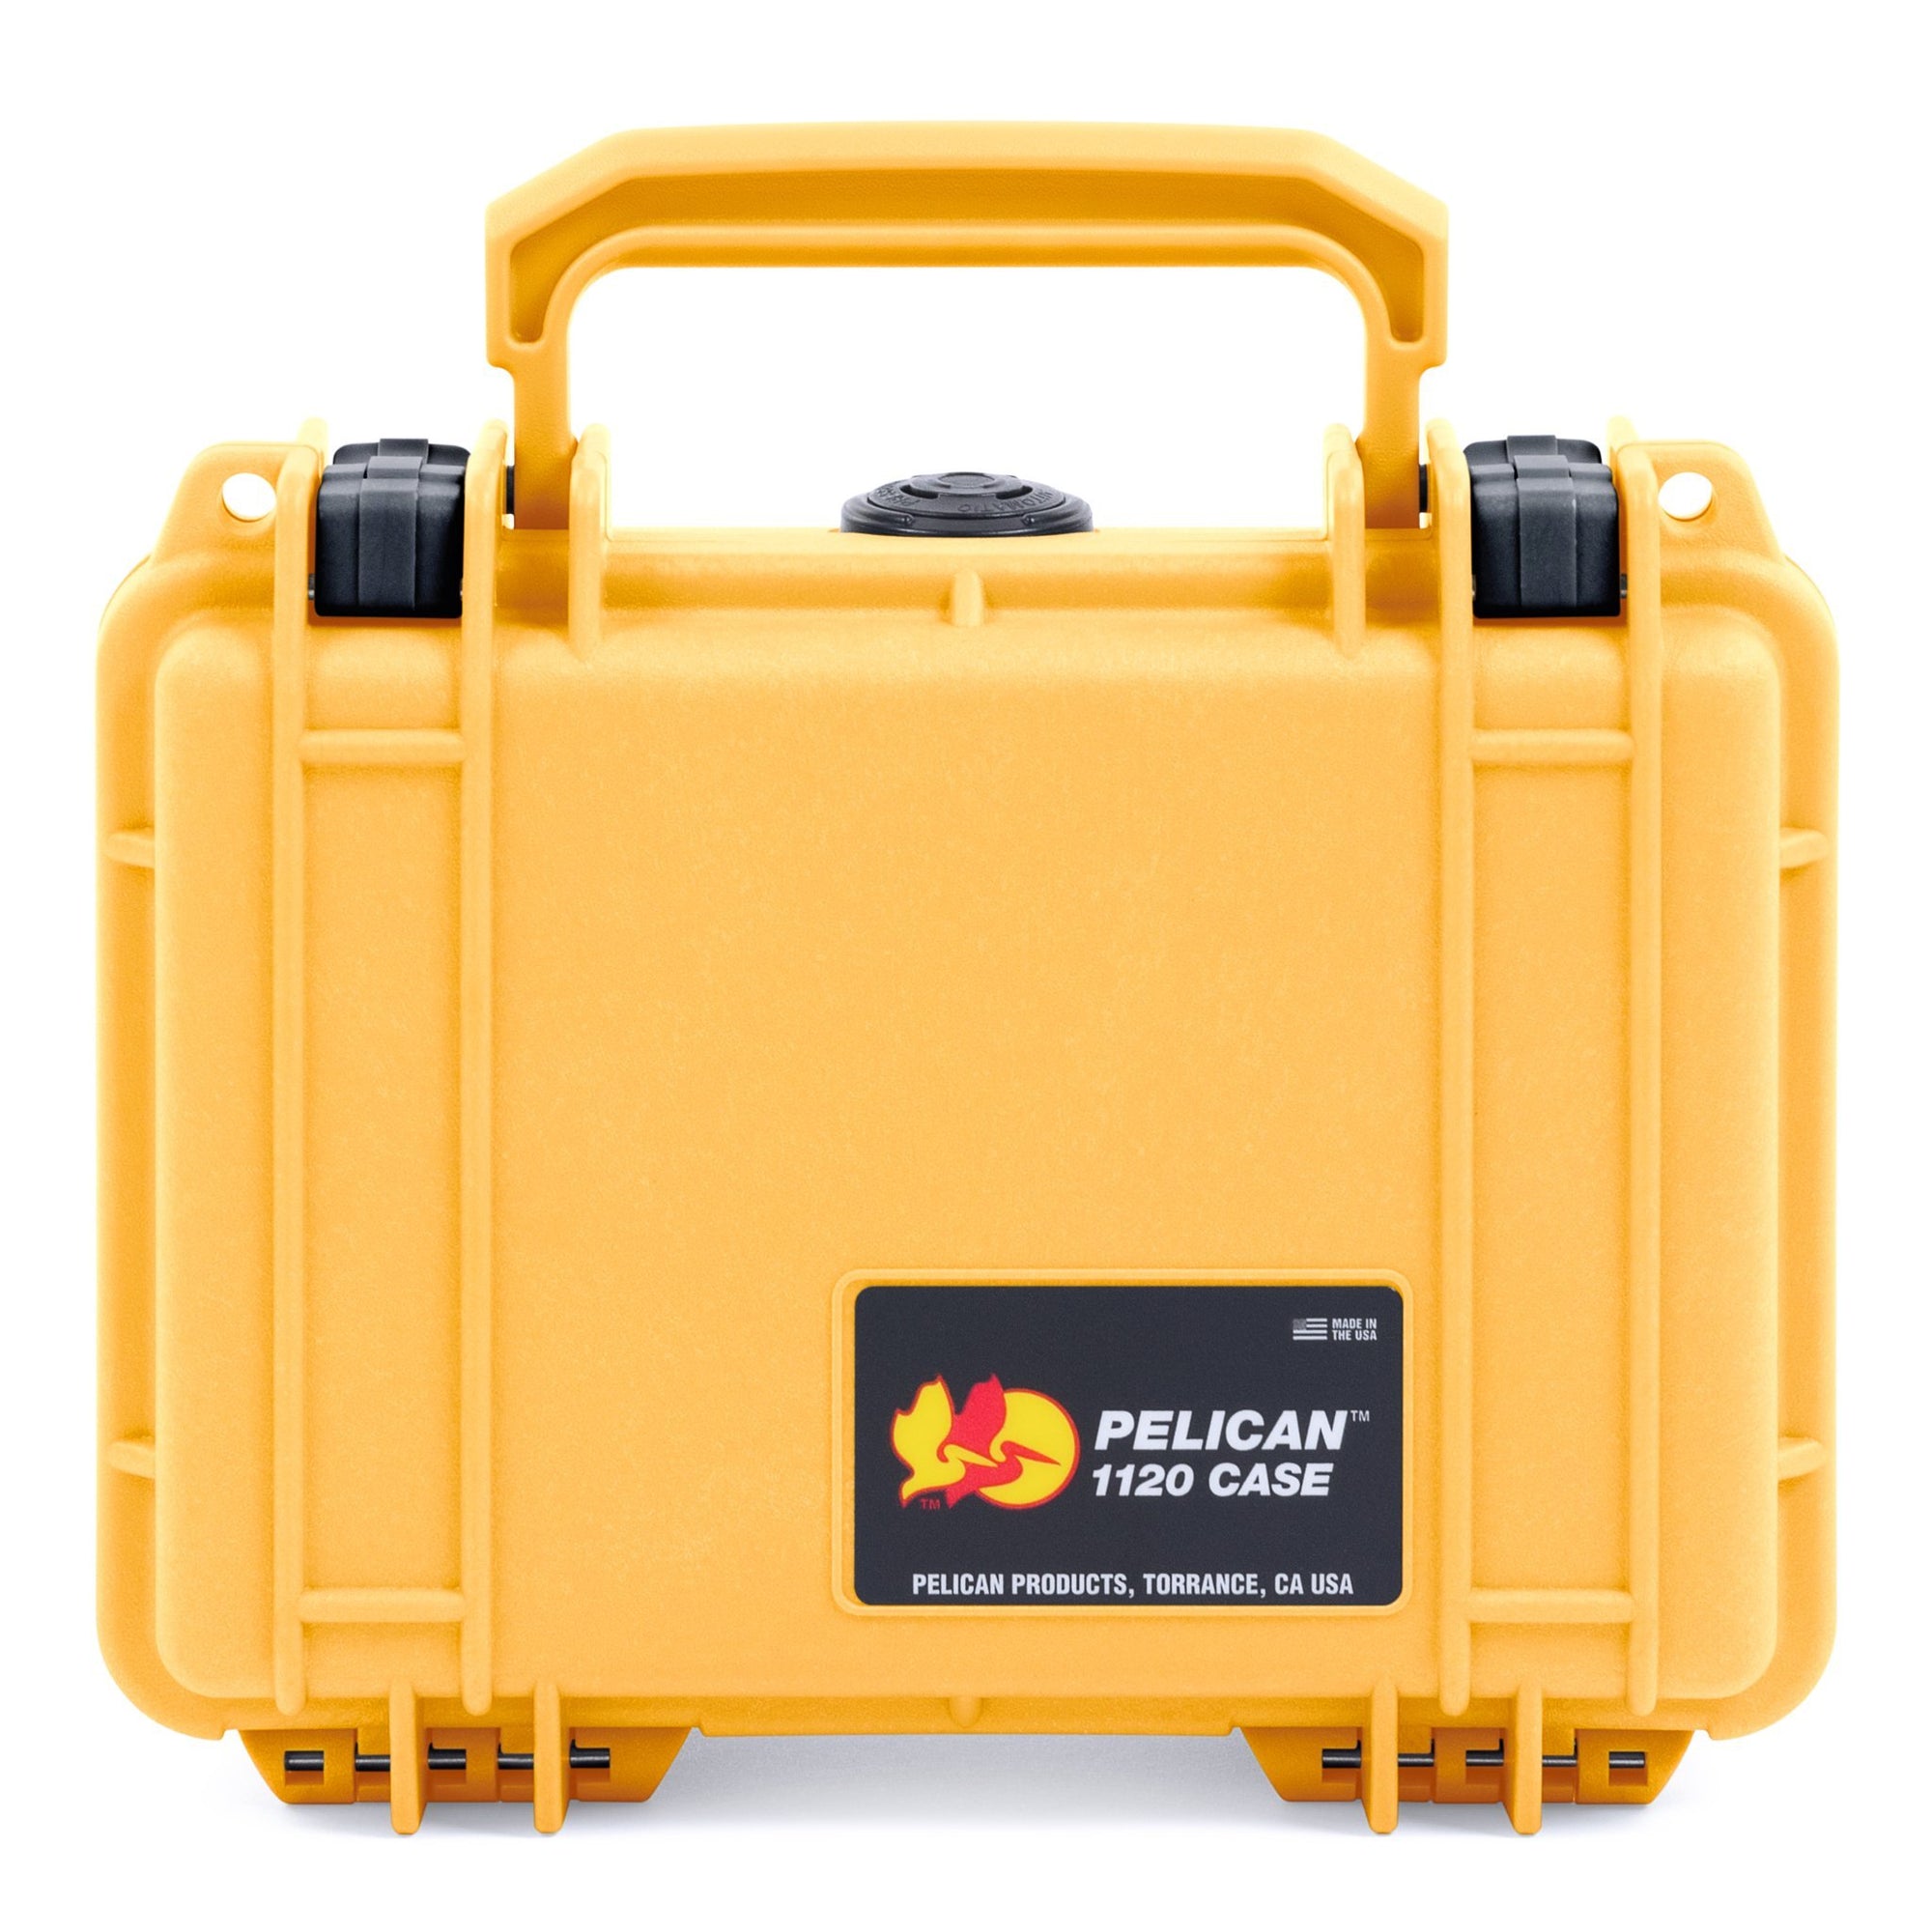 Pelican 1120 Case, Yellow with Black Latches ColorCase 